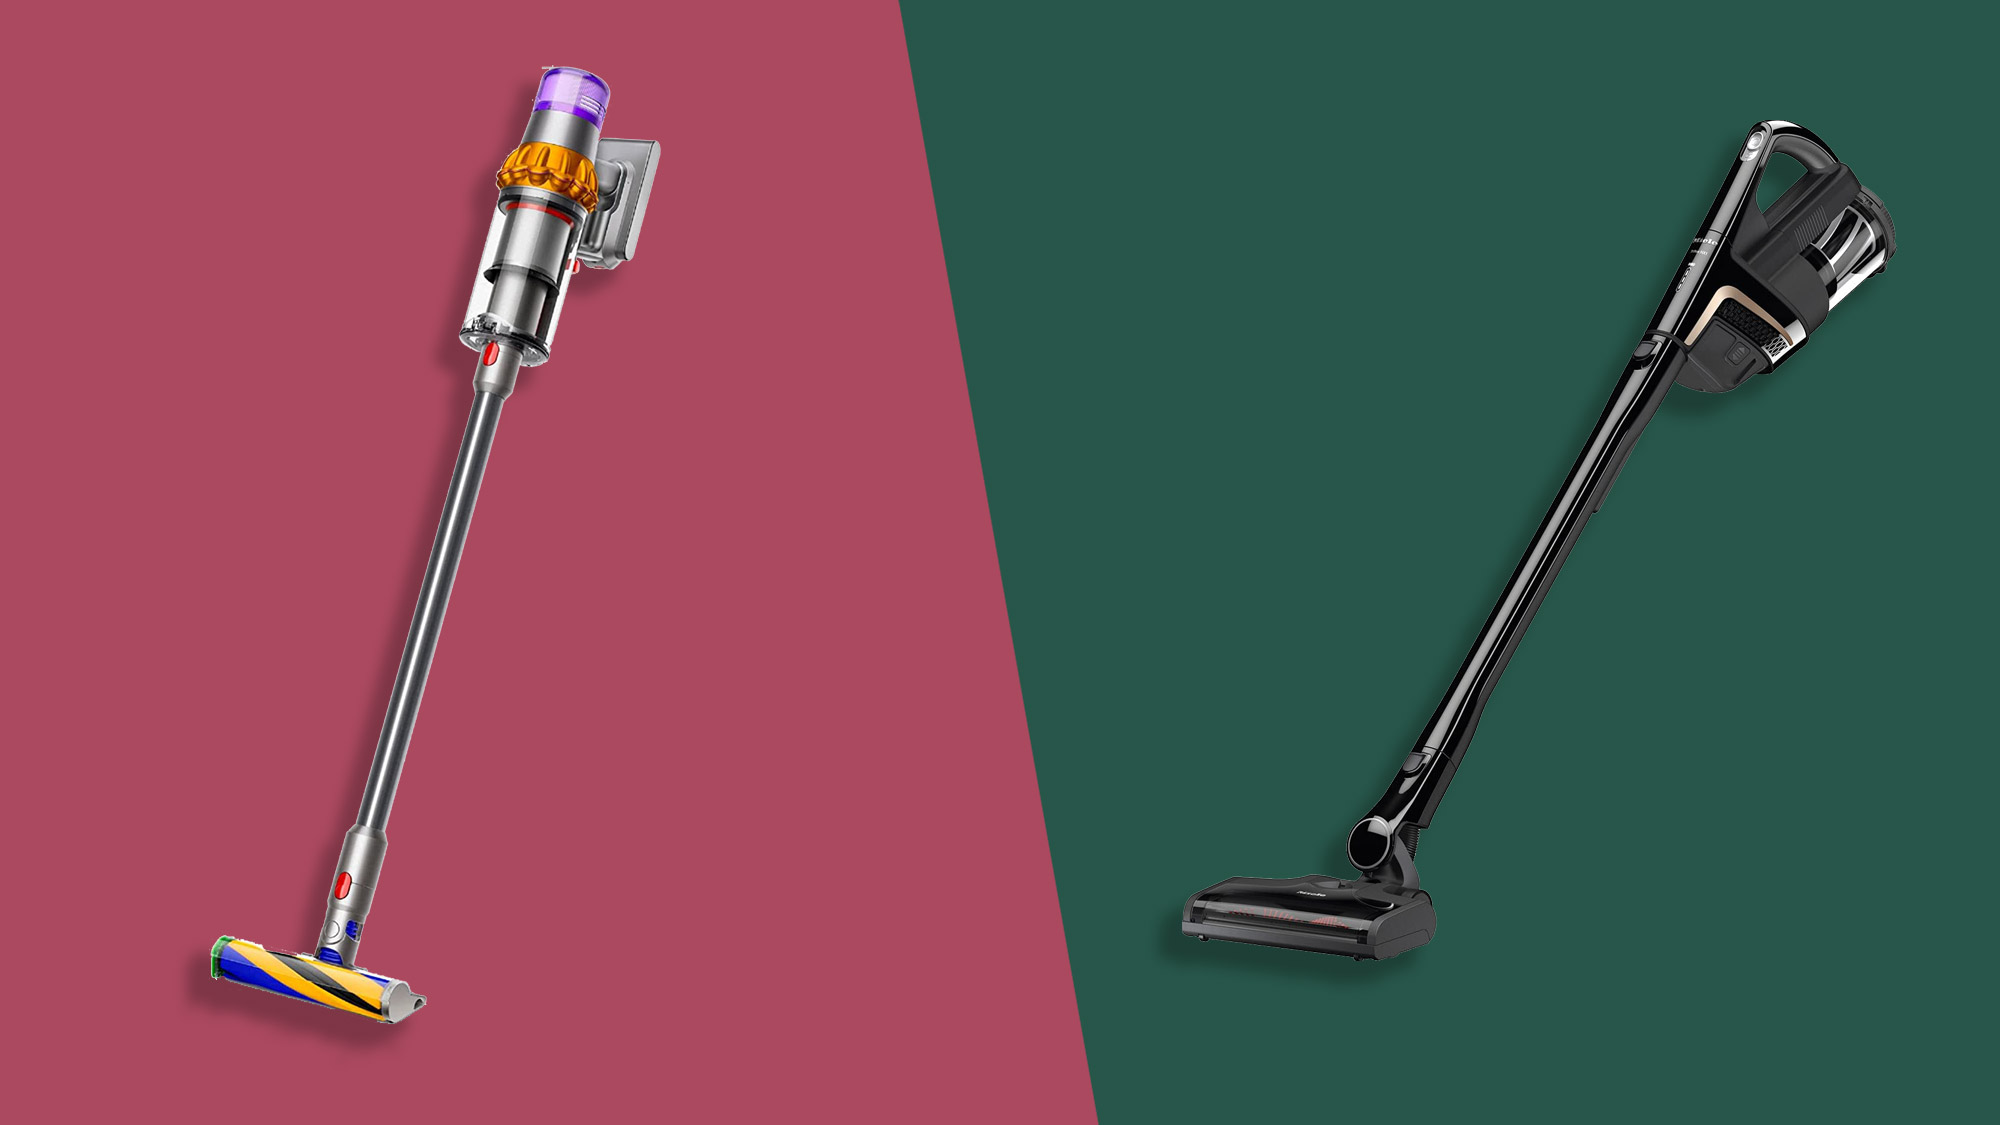 tilgivet Sindssyge Isse Dyson vs Miele: which vacuum cleaner is right for you? | TechRadar